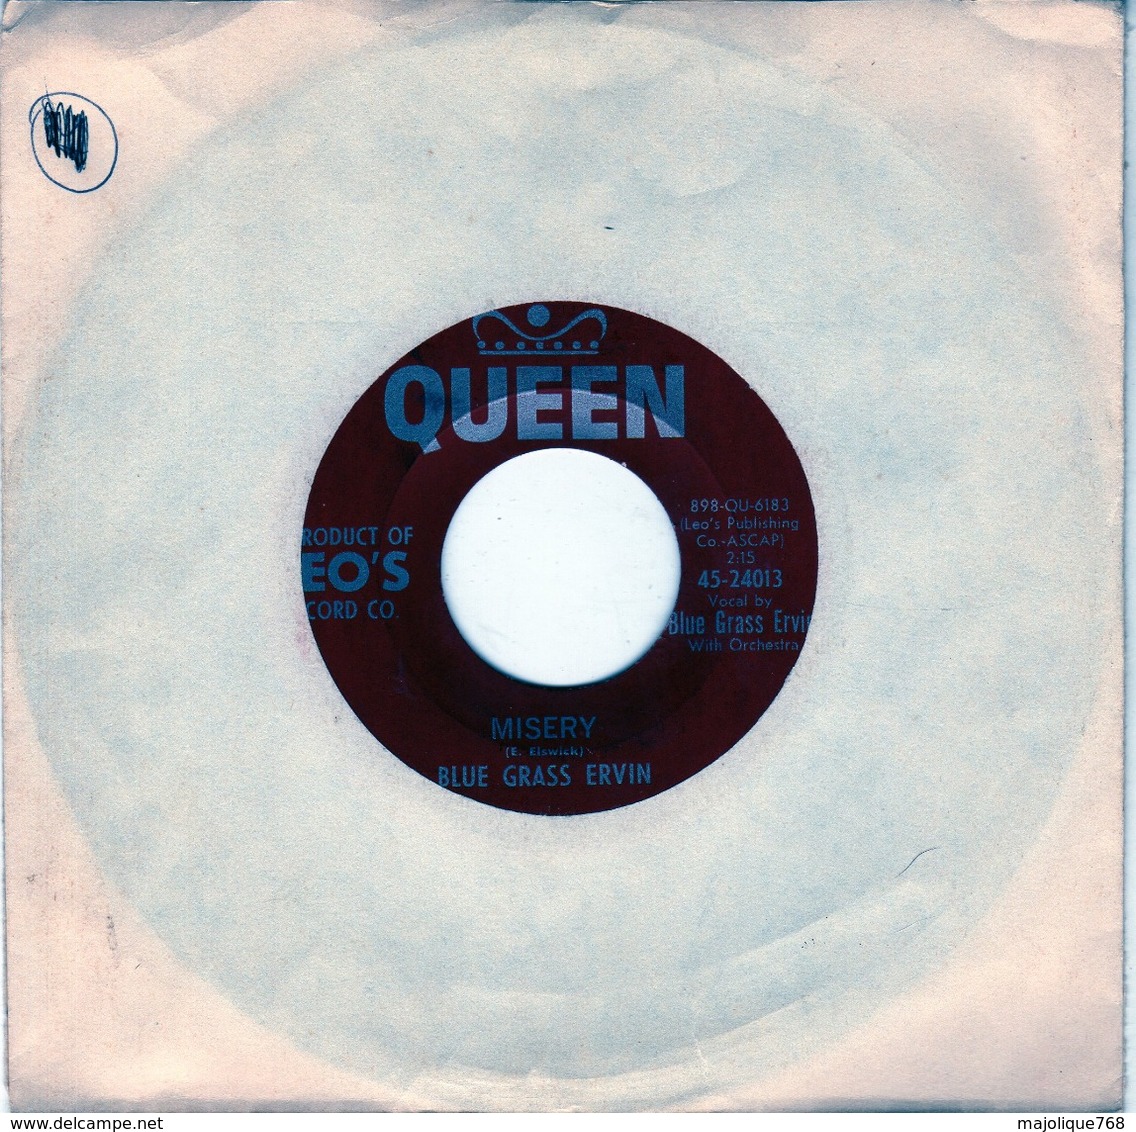 Blue Grass Ervin - Misery - I Won't Cry Alone - Queen 45-24013 - 1962 - - Country & Folk